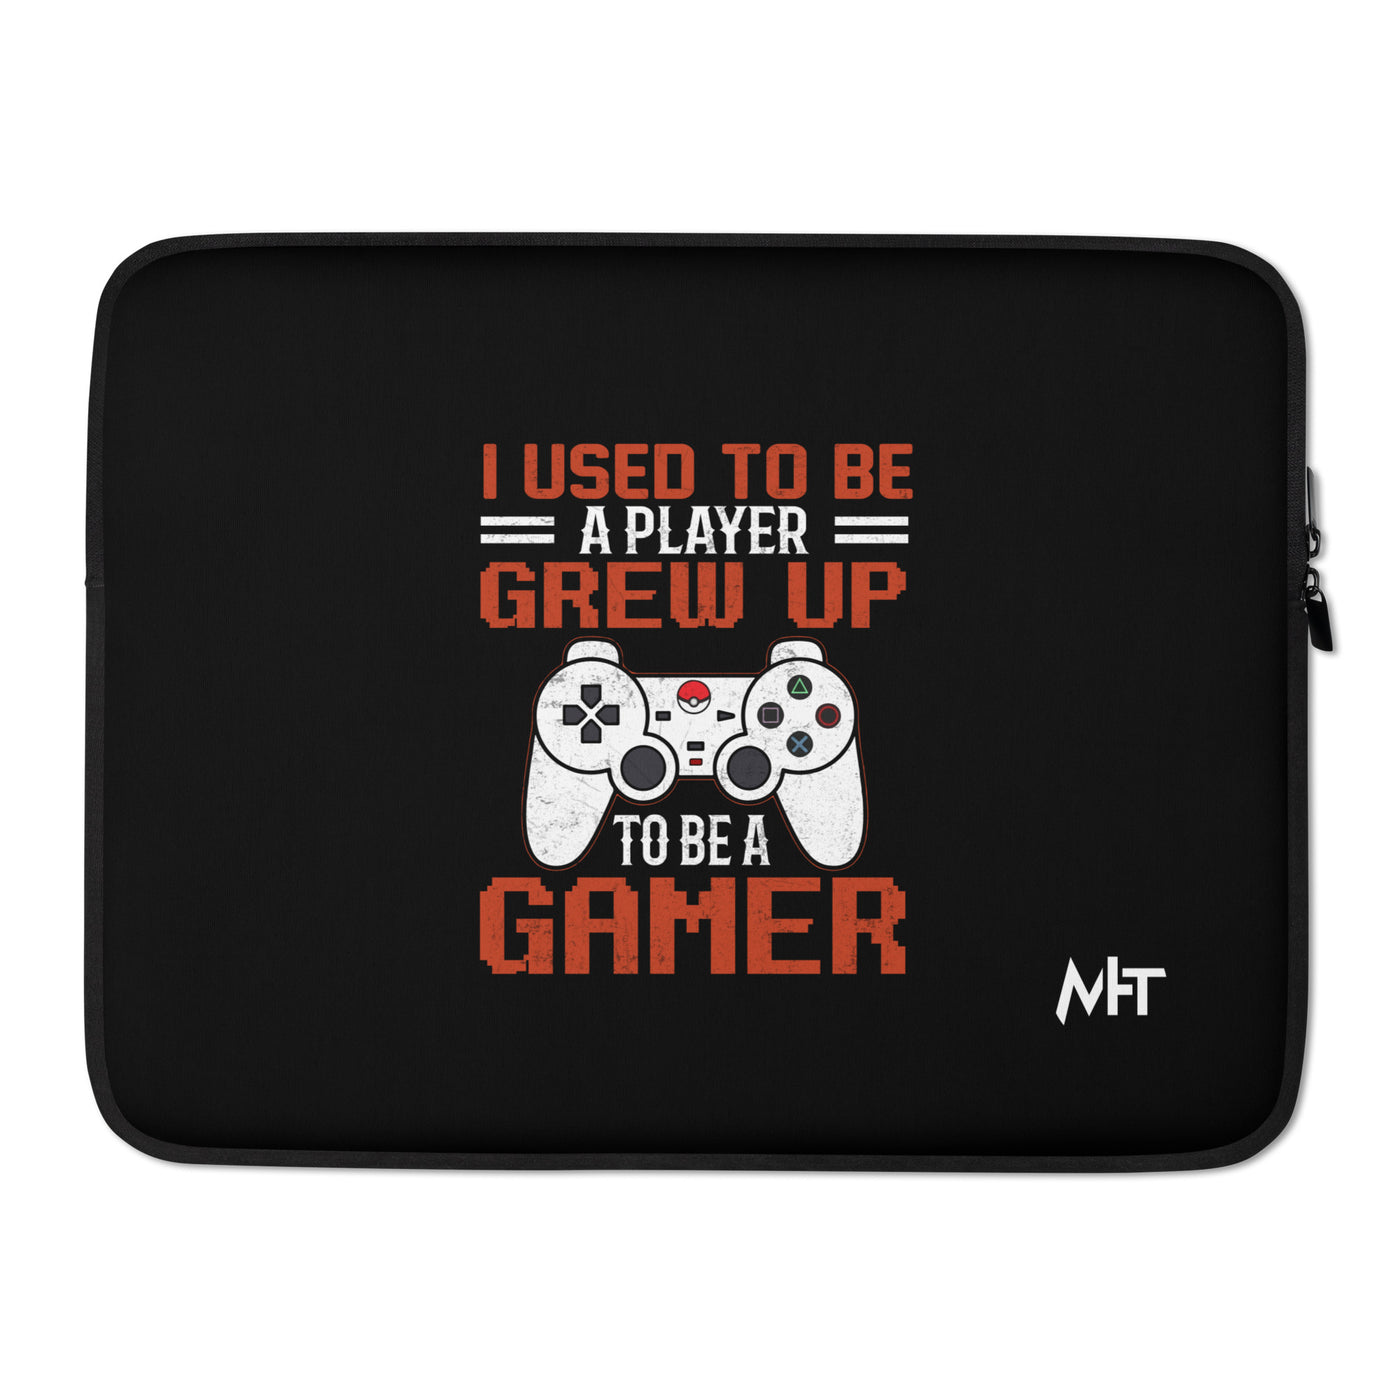 I Used to be a Player; Grew up to be a Gamer - Laptop Sleeve